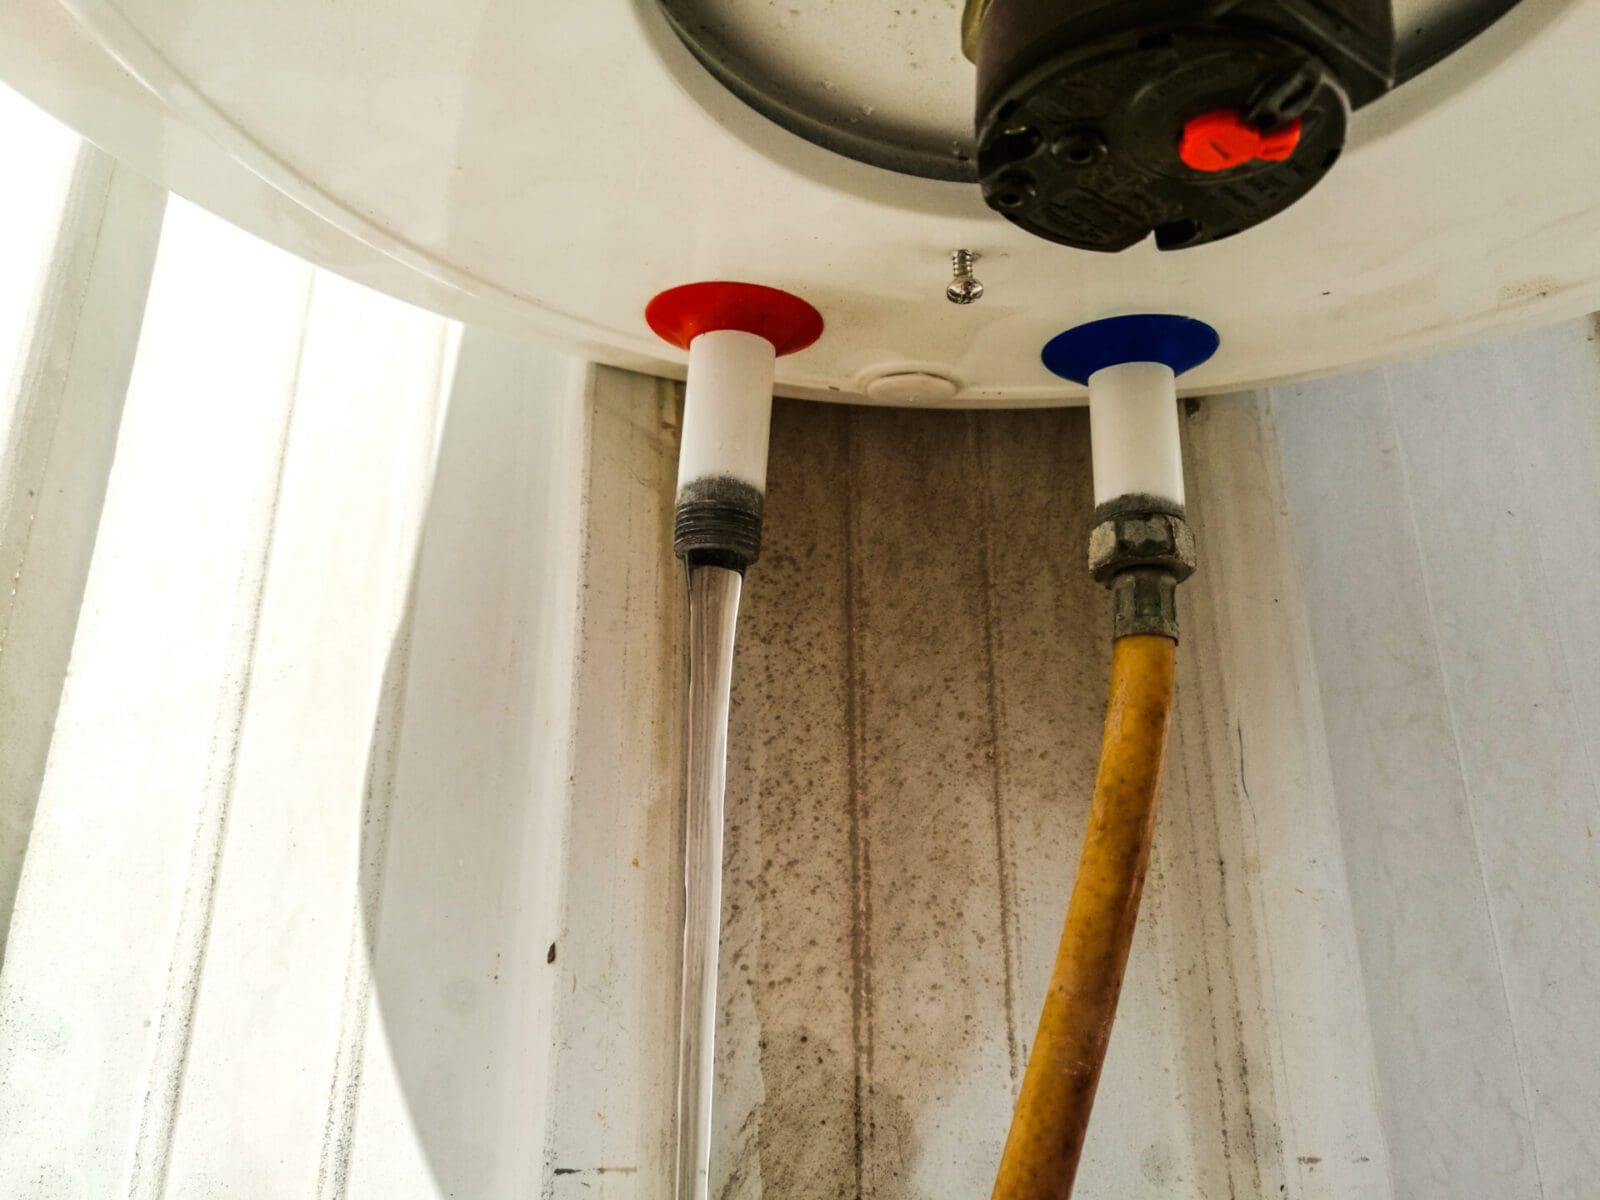 Water Heater Leaking? Here’s What to Do